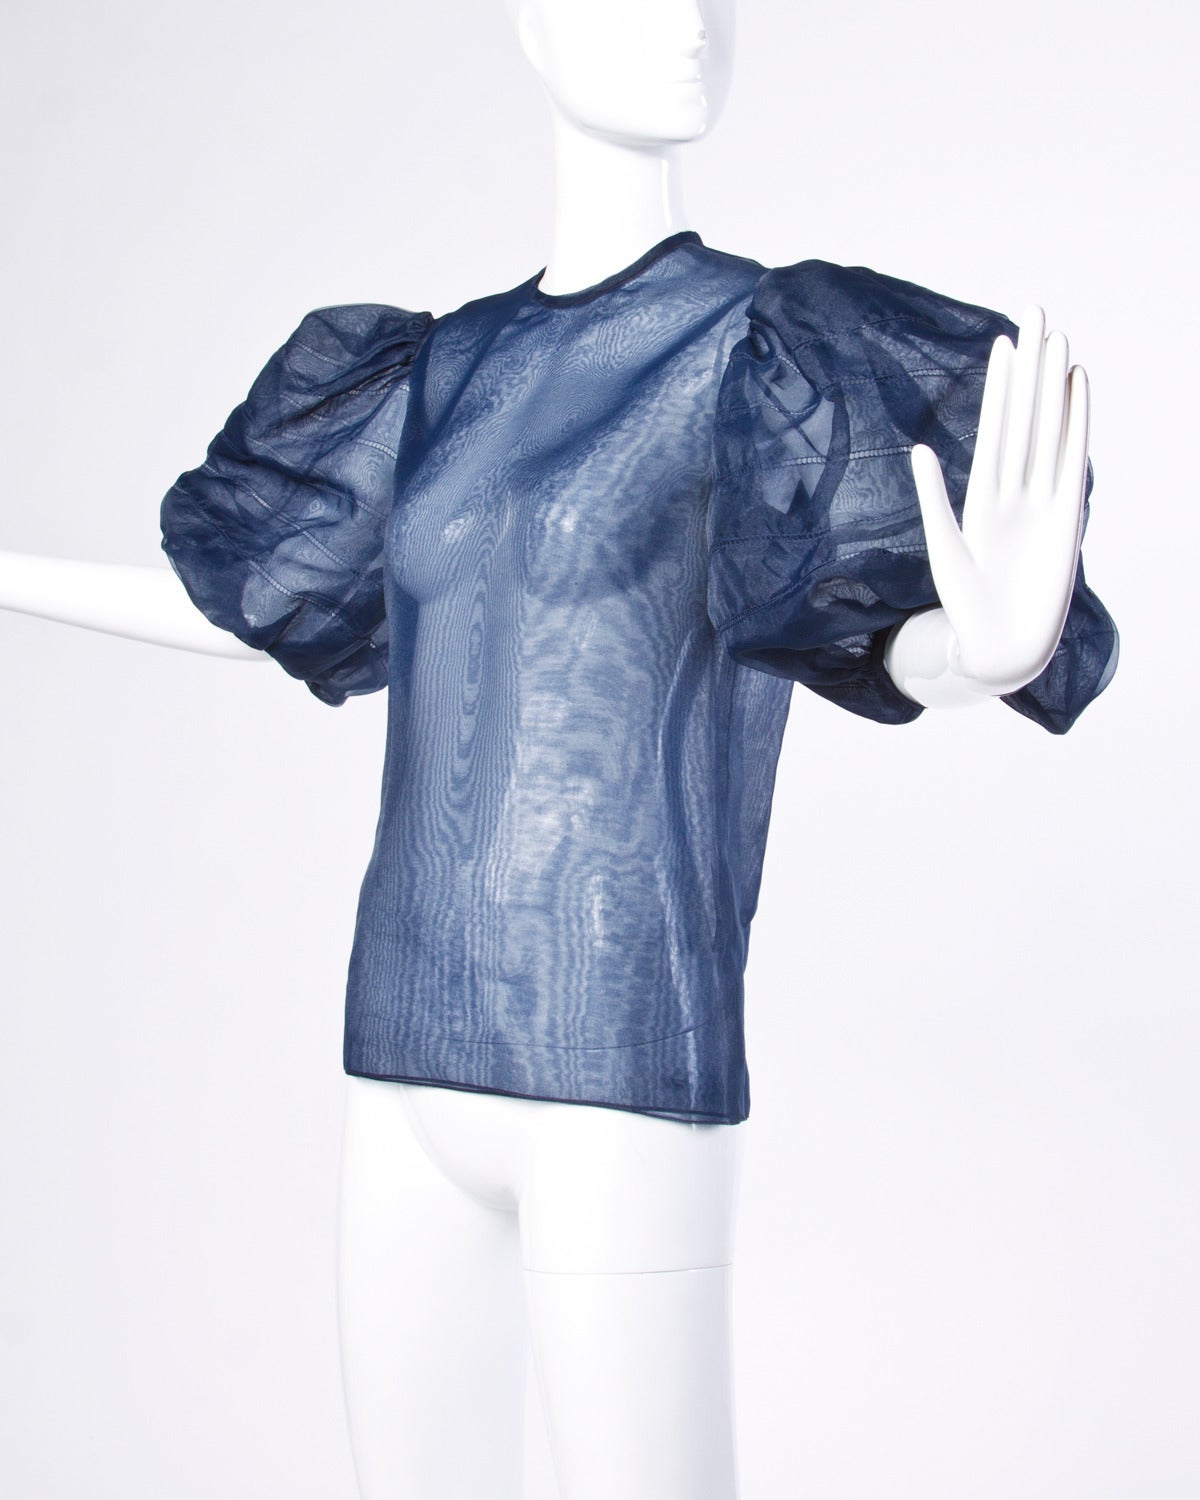 Dramatic navy blue organza silk top with puff sleeves by William Pearson.

Details:

Unlined
Back Button Closure
Marked Size: 10
Color: Navy Blue
Fabric: Organza
Label: William Pearson

Measurements:

Bust: Up To 38